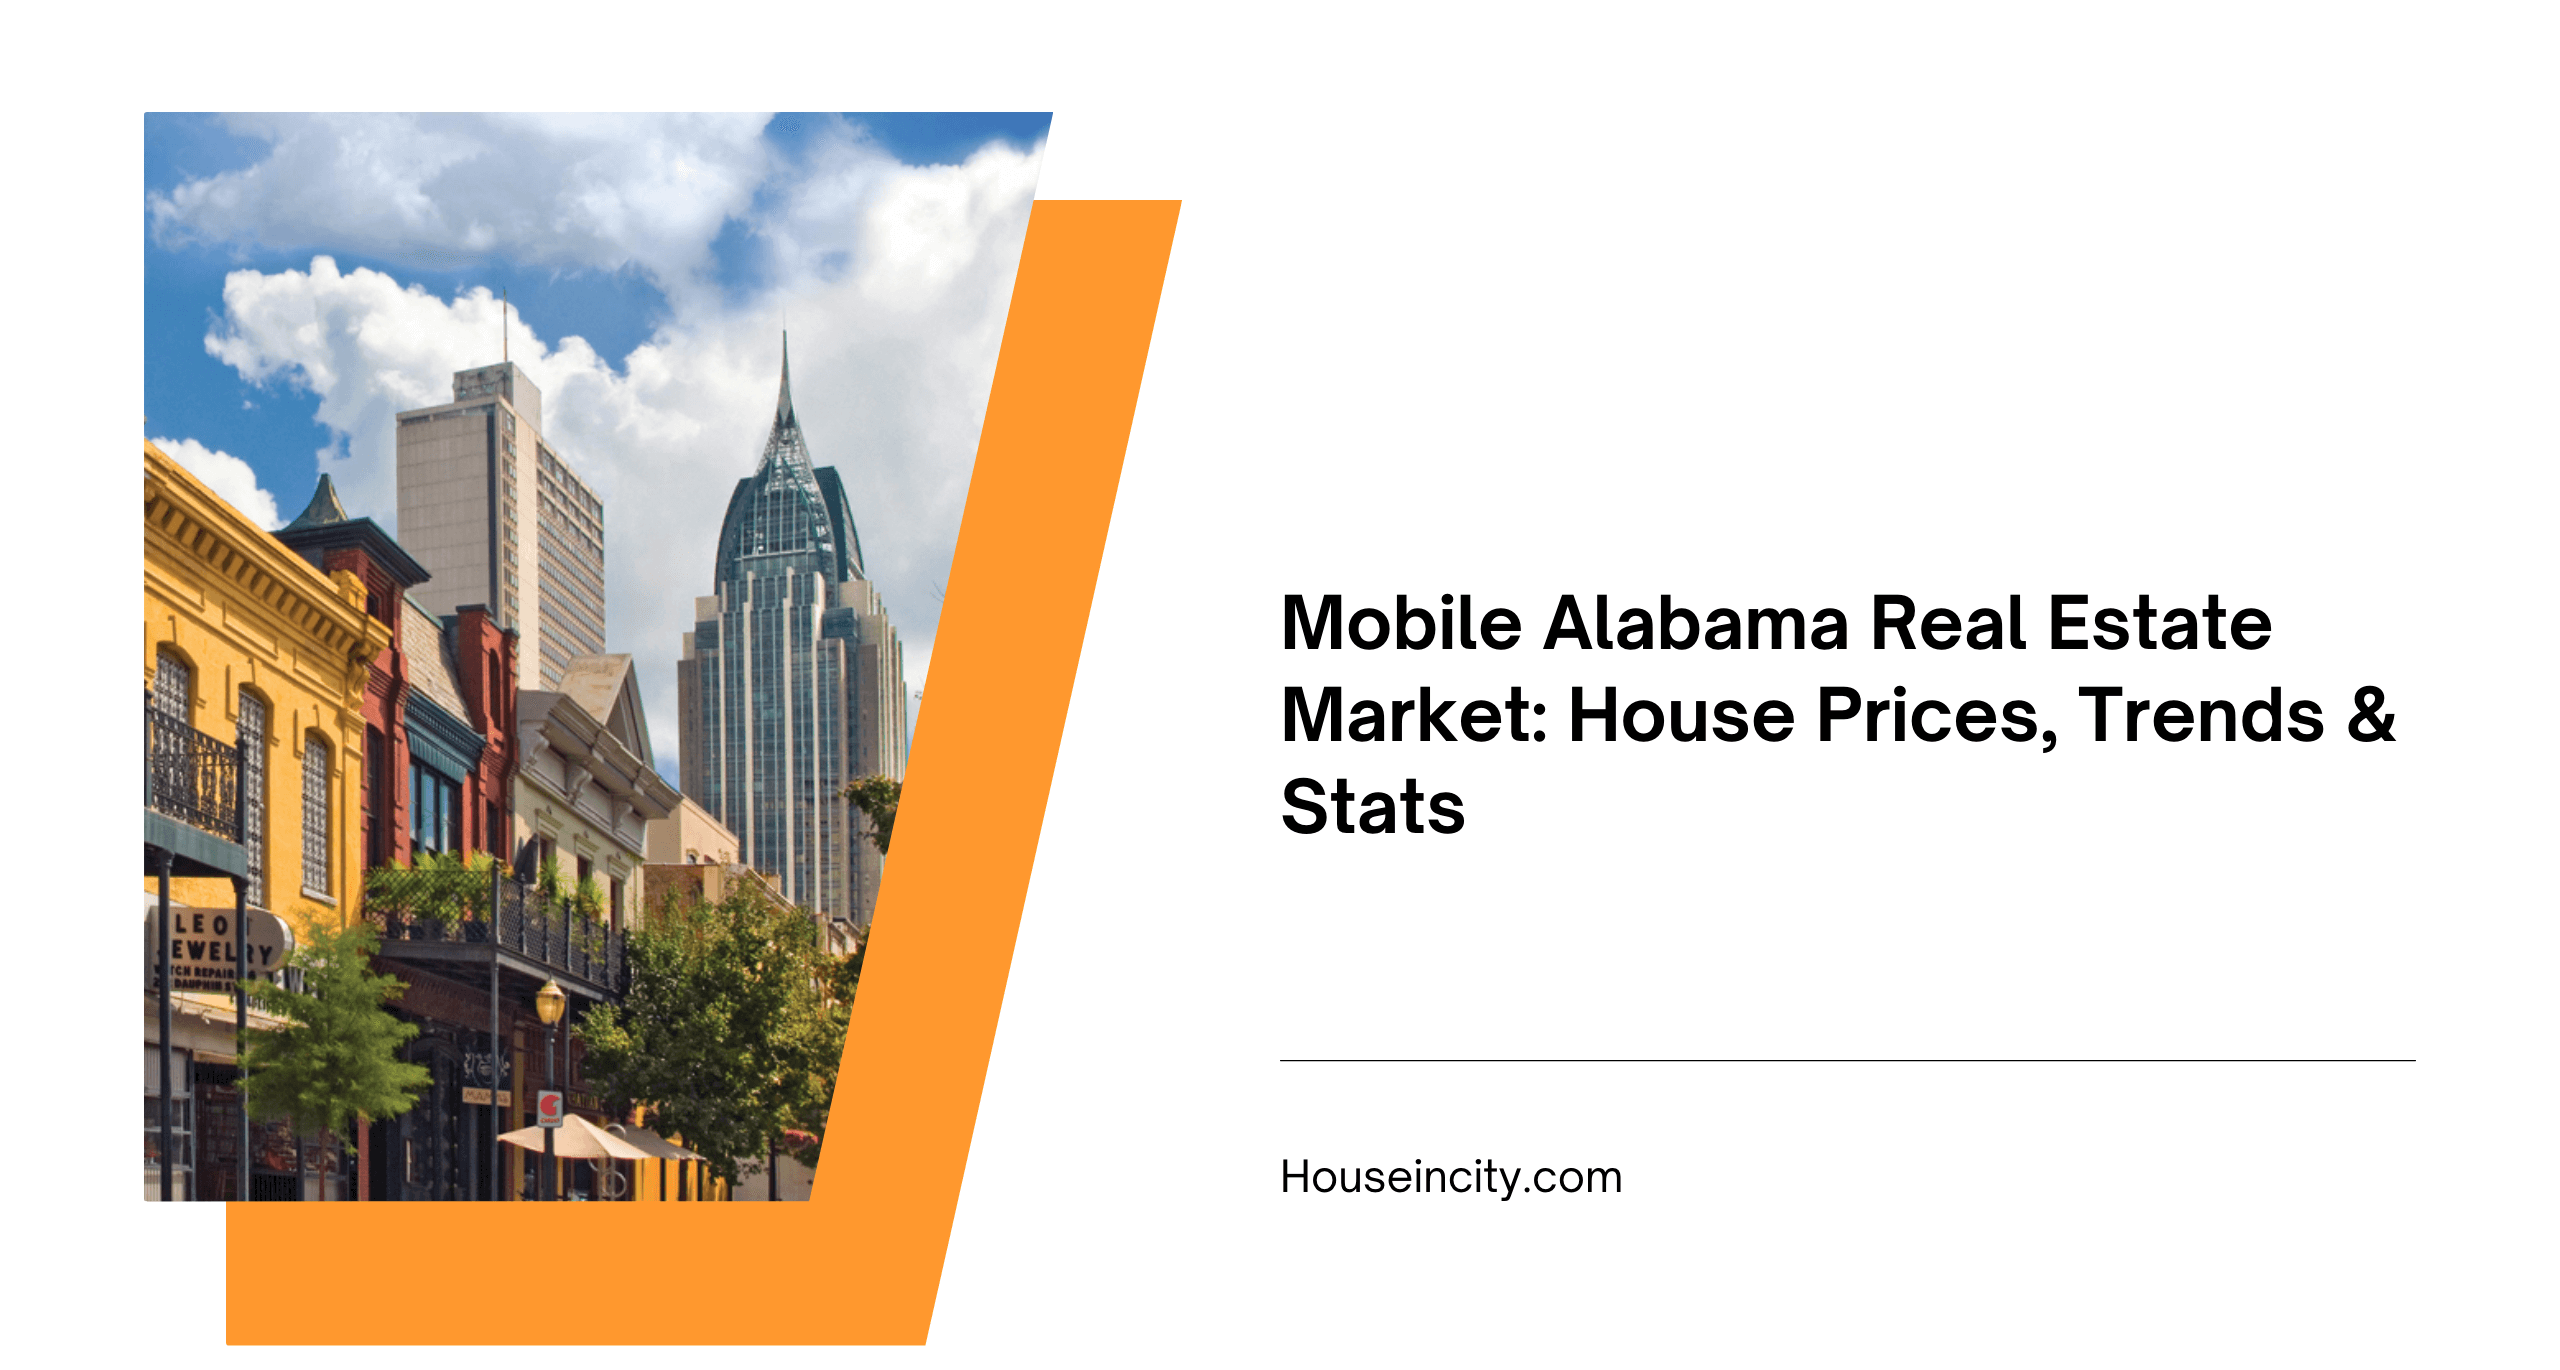 Mobile Alabama Real Estate Market: House Prices, Trends & Stats